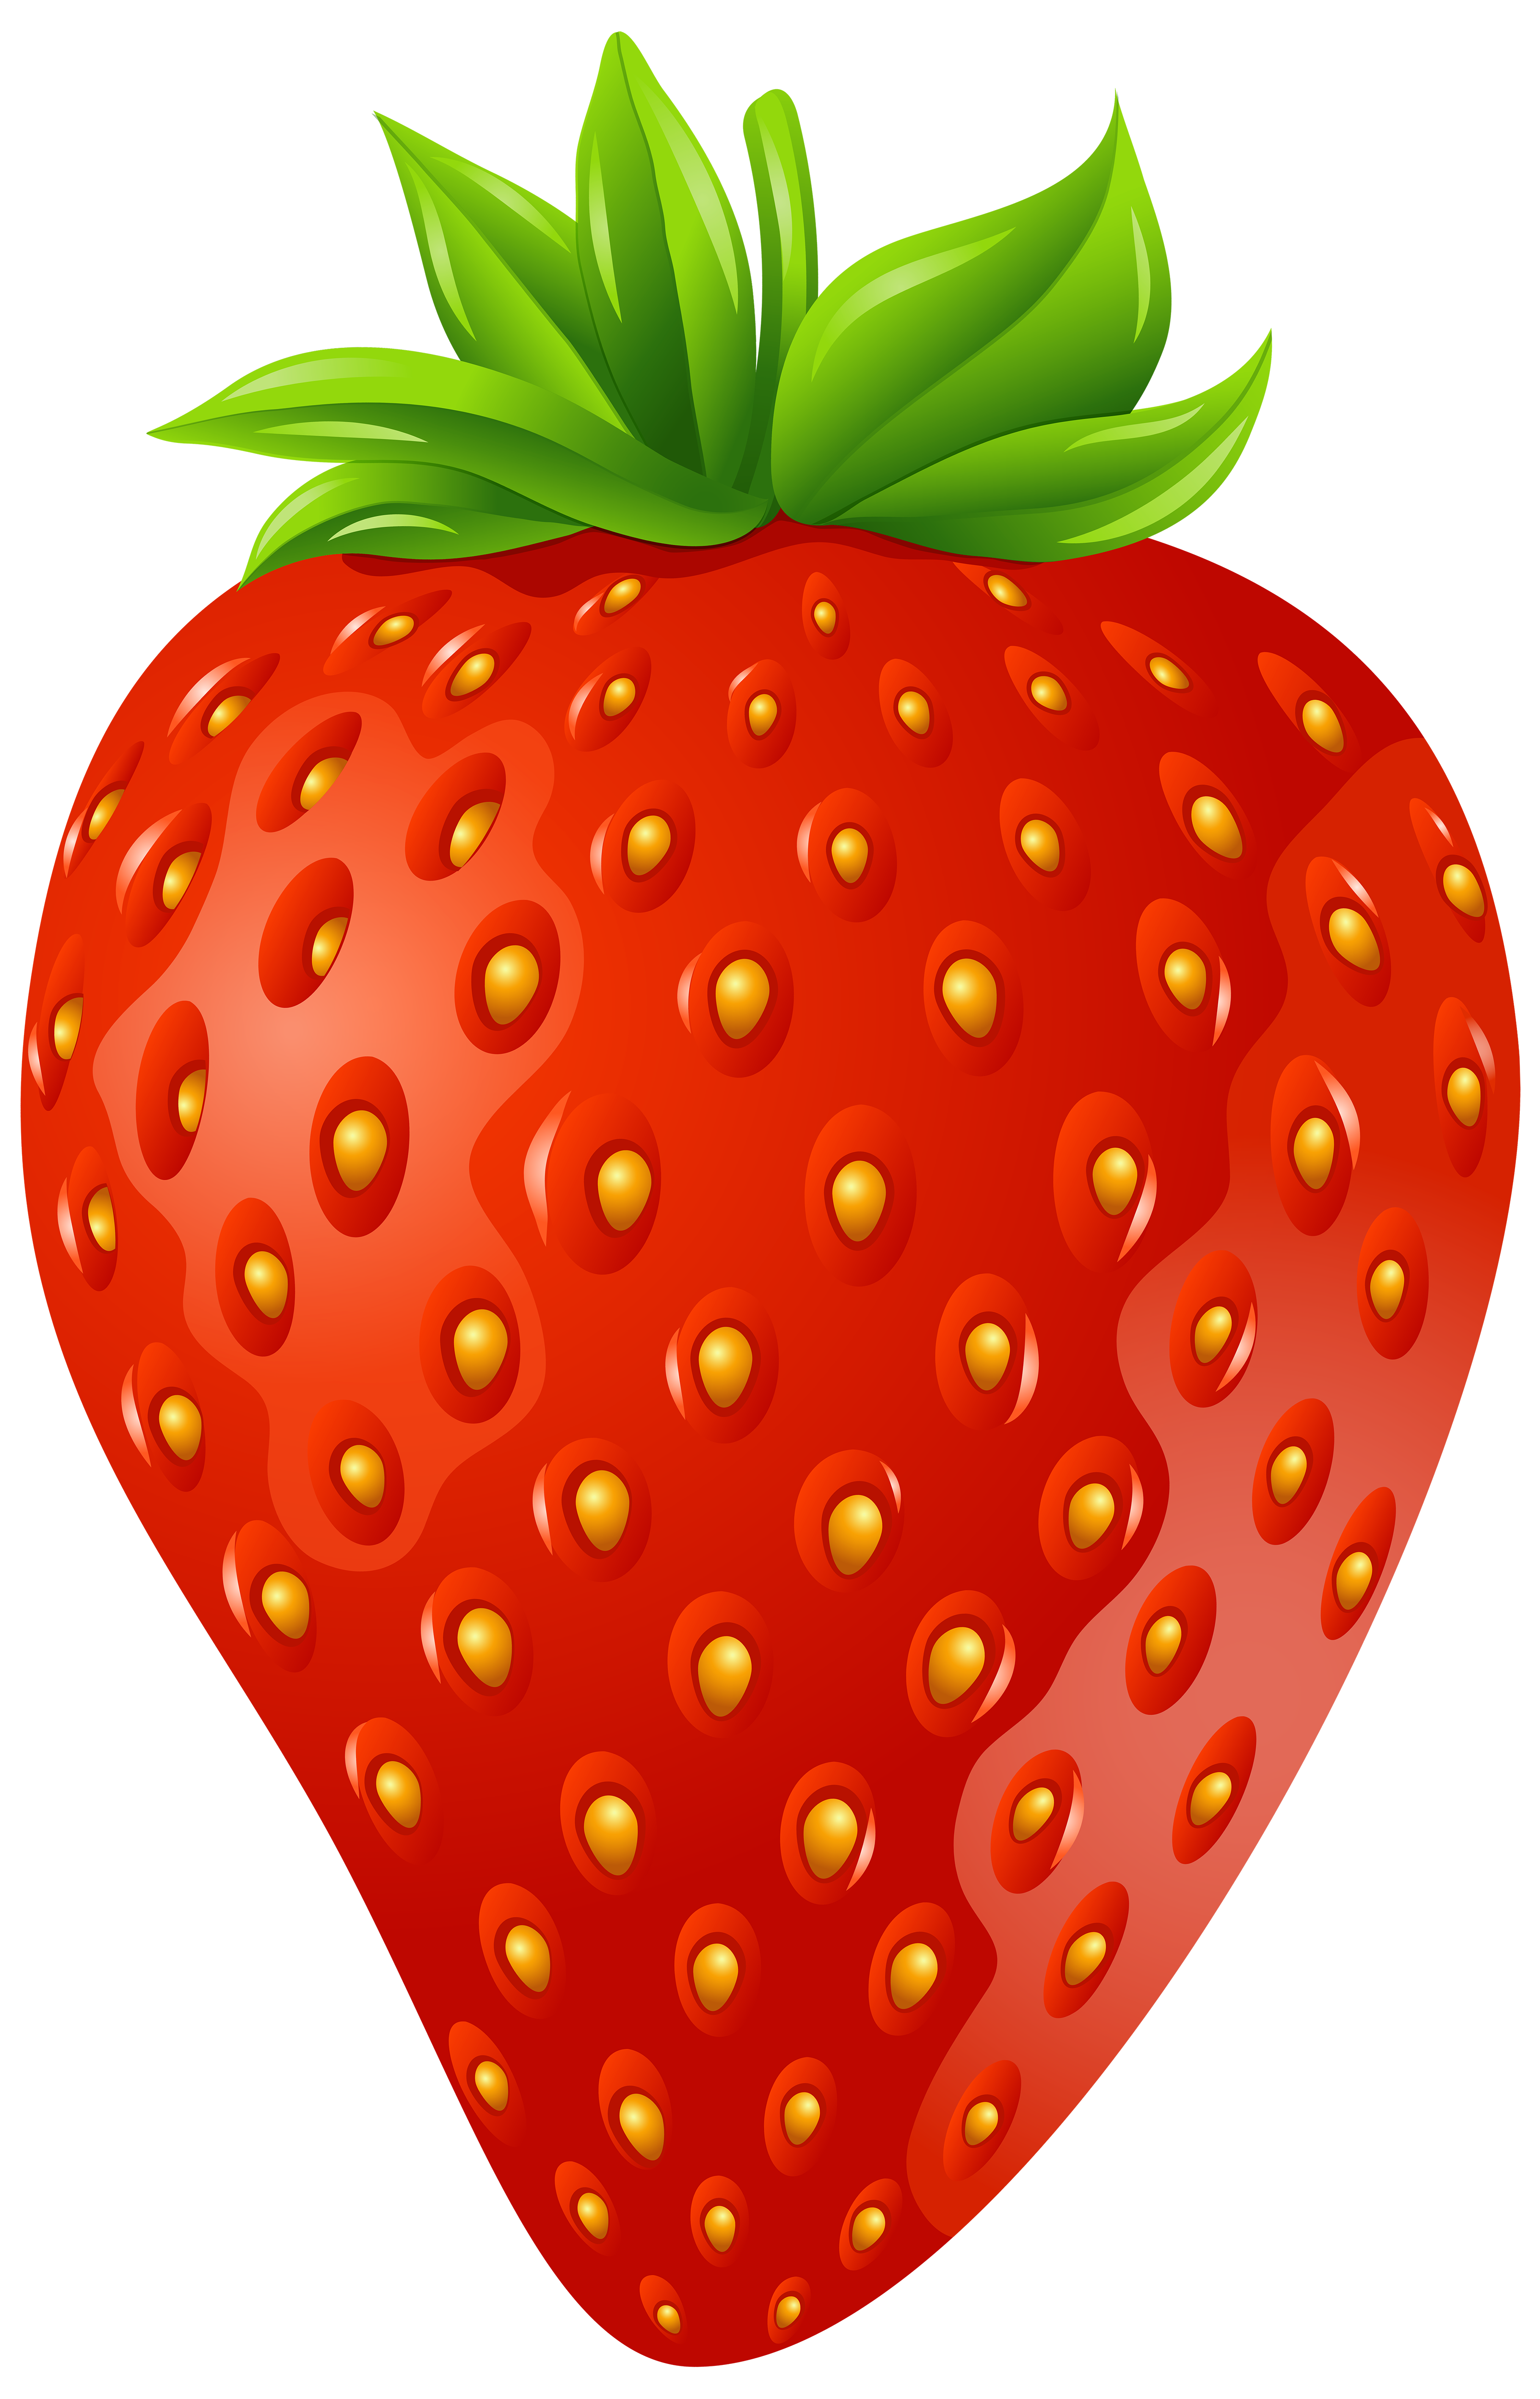 clipart of a strawberry - photo #13